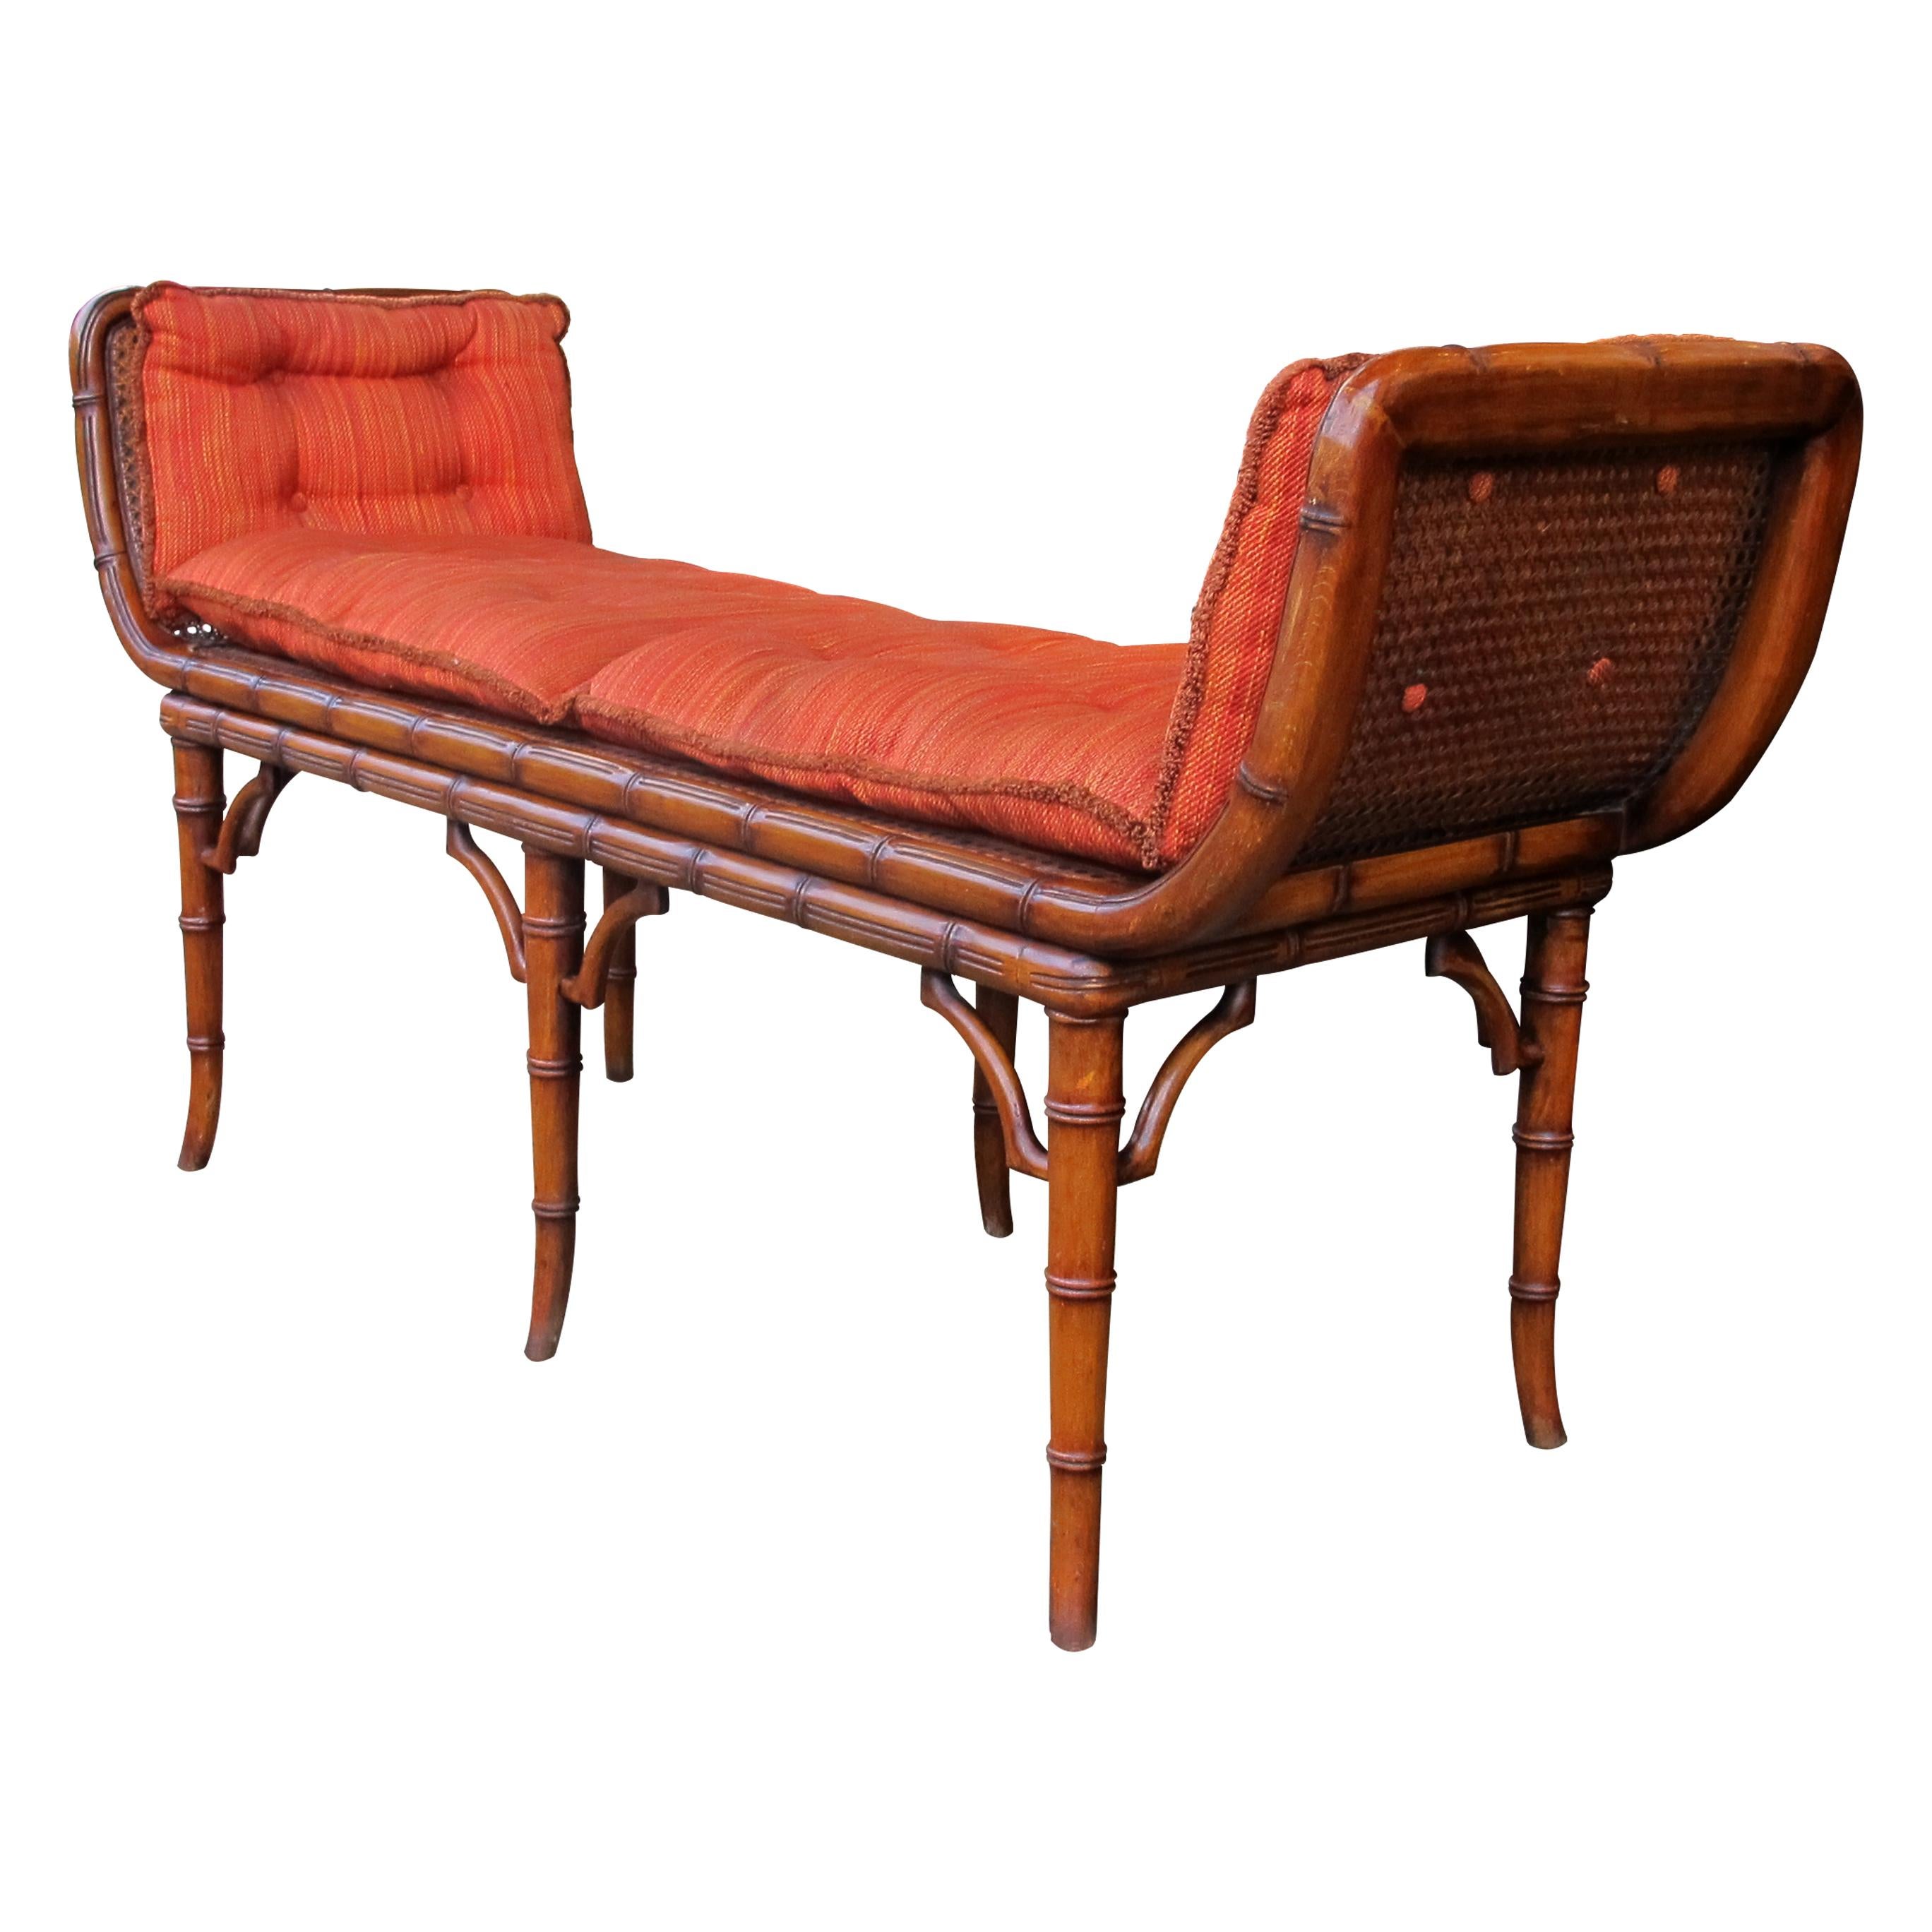 Art Deco Italian 1940s Cane and Faux Bamboo Frame Bench with its Original Upholstery For Sale